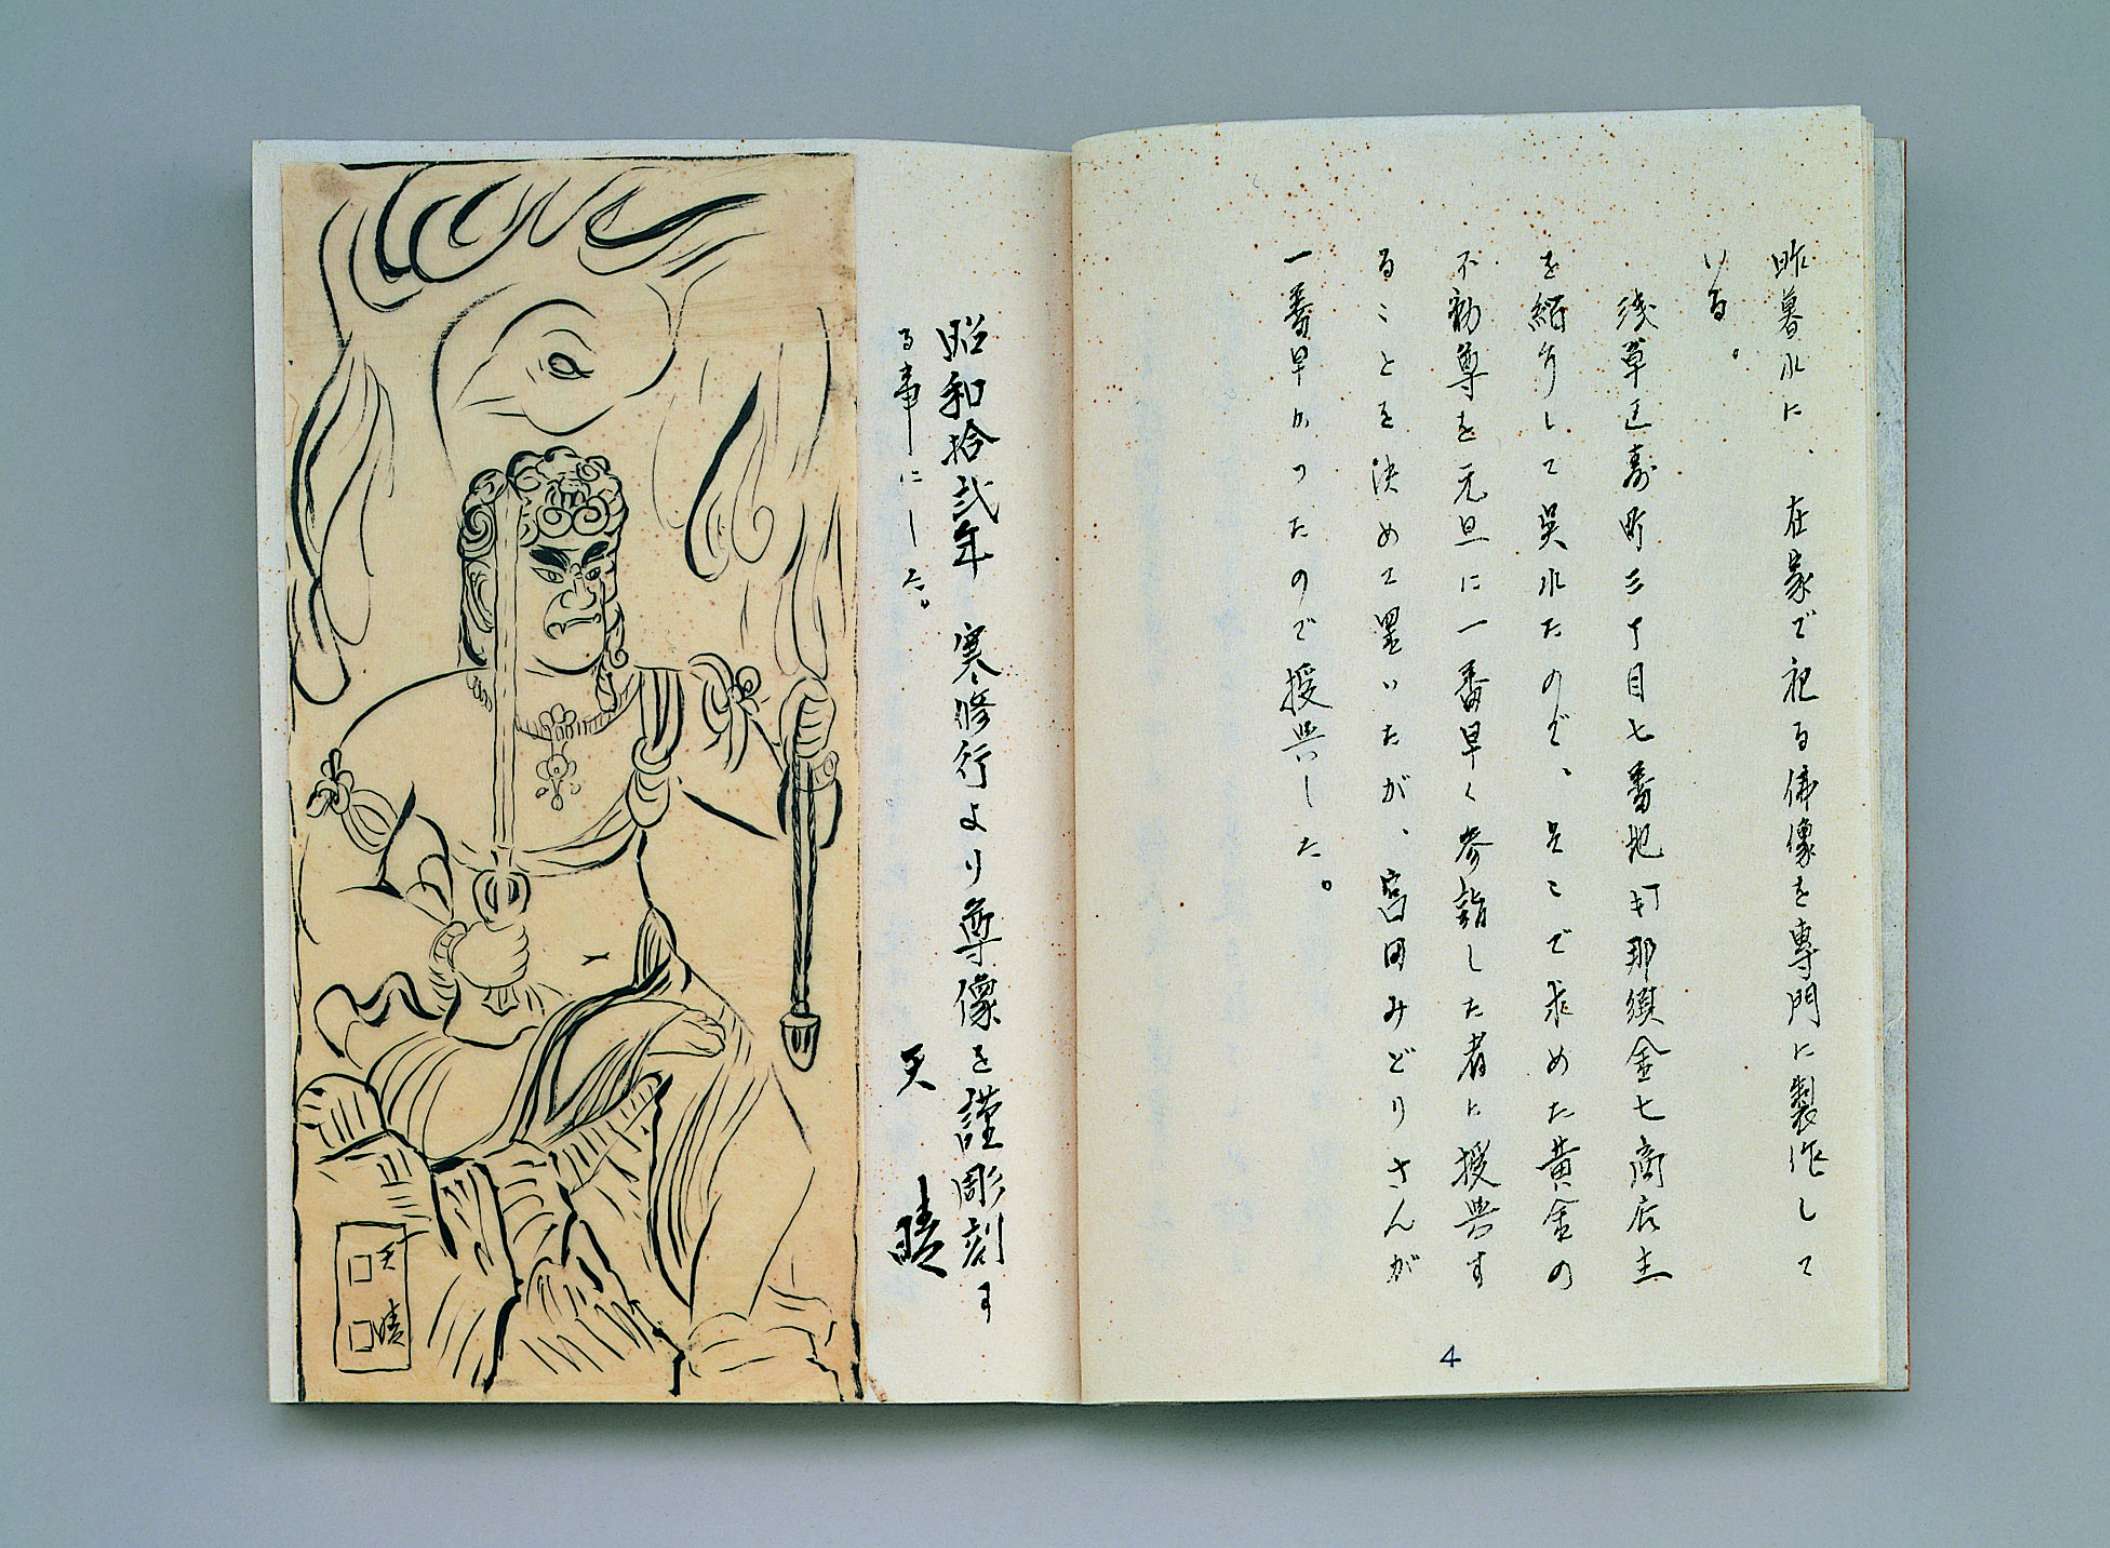 A journal lies open in which a seated scowling figure holding a sword and noose is depicted in black ink on the left page, and vertical columns of Japanese calligraphic writing appear on the right.